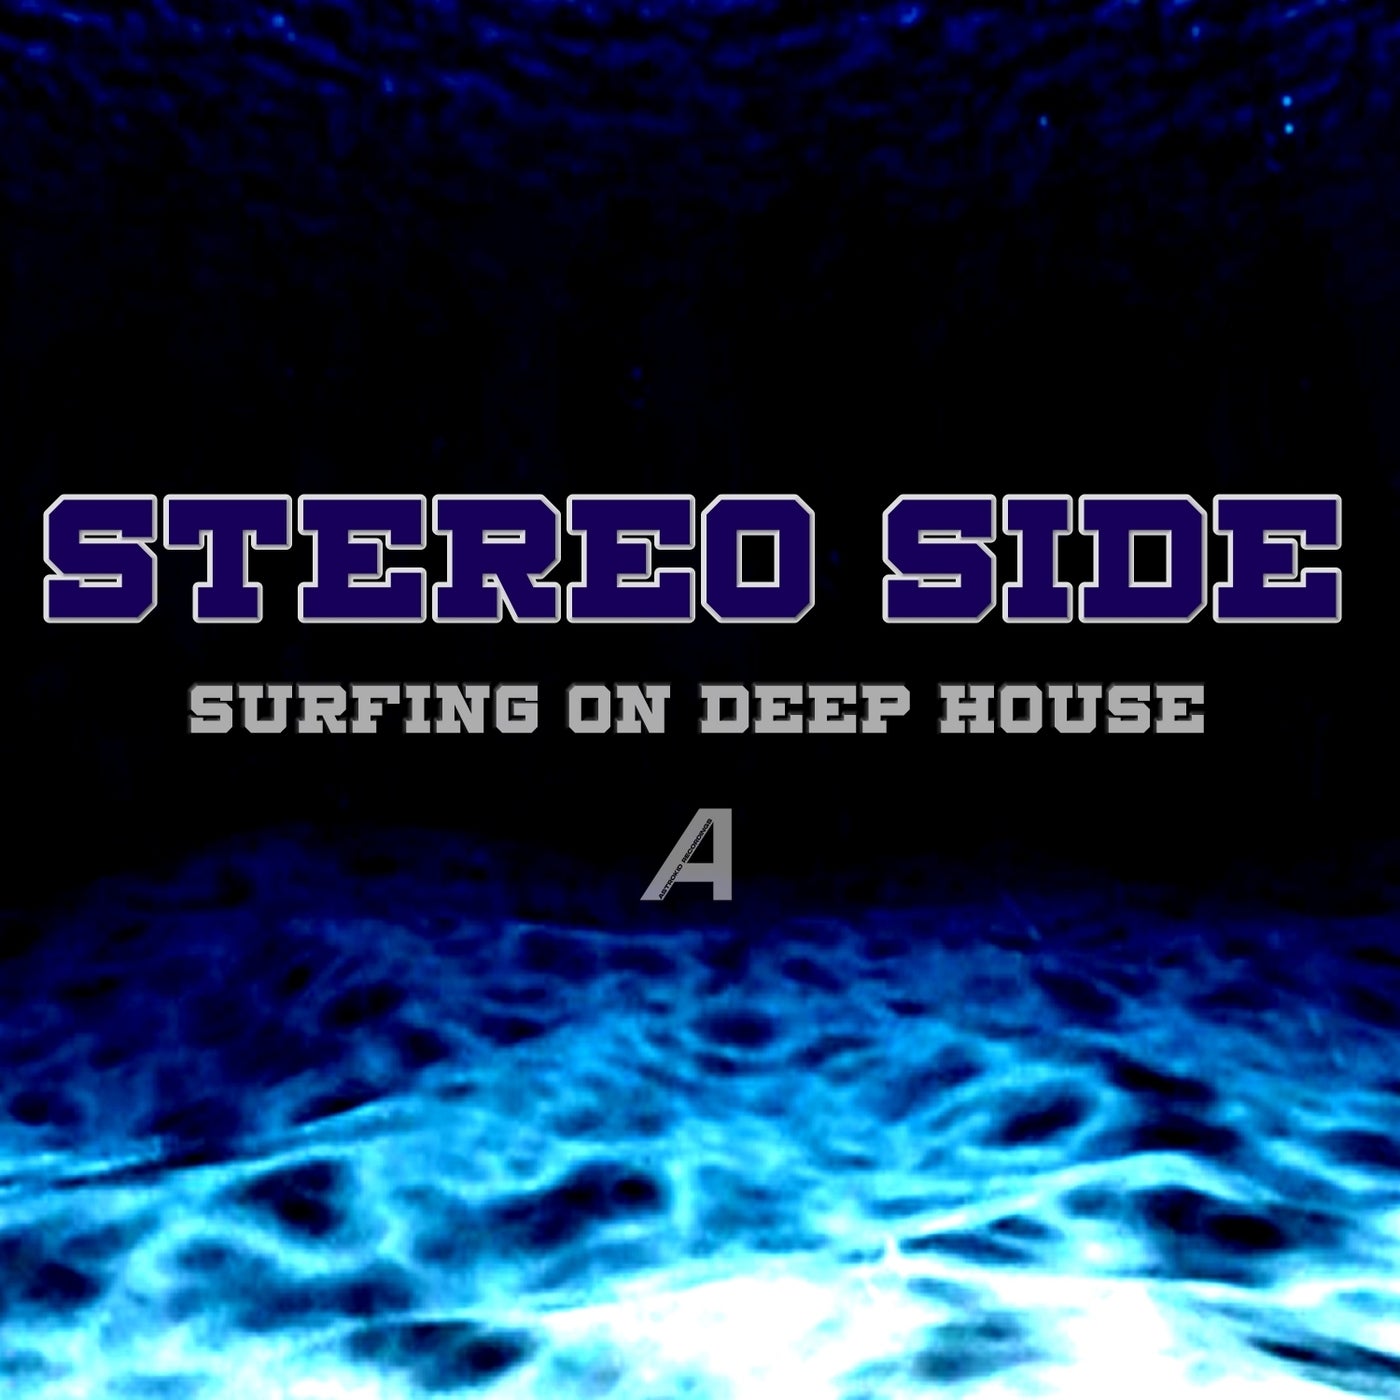 Surfing on Deep House